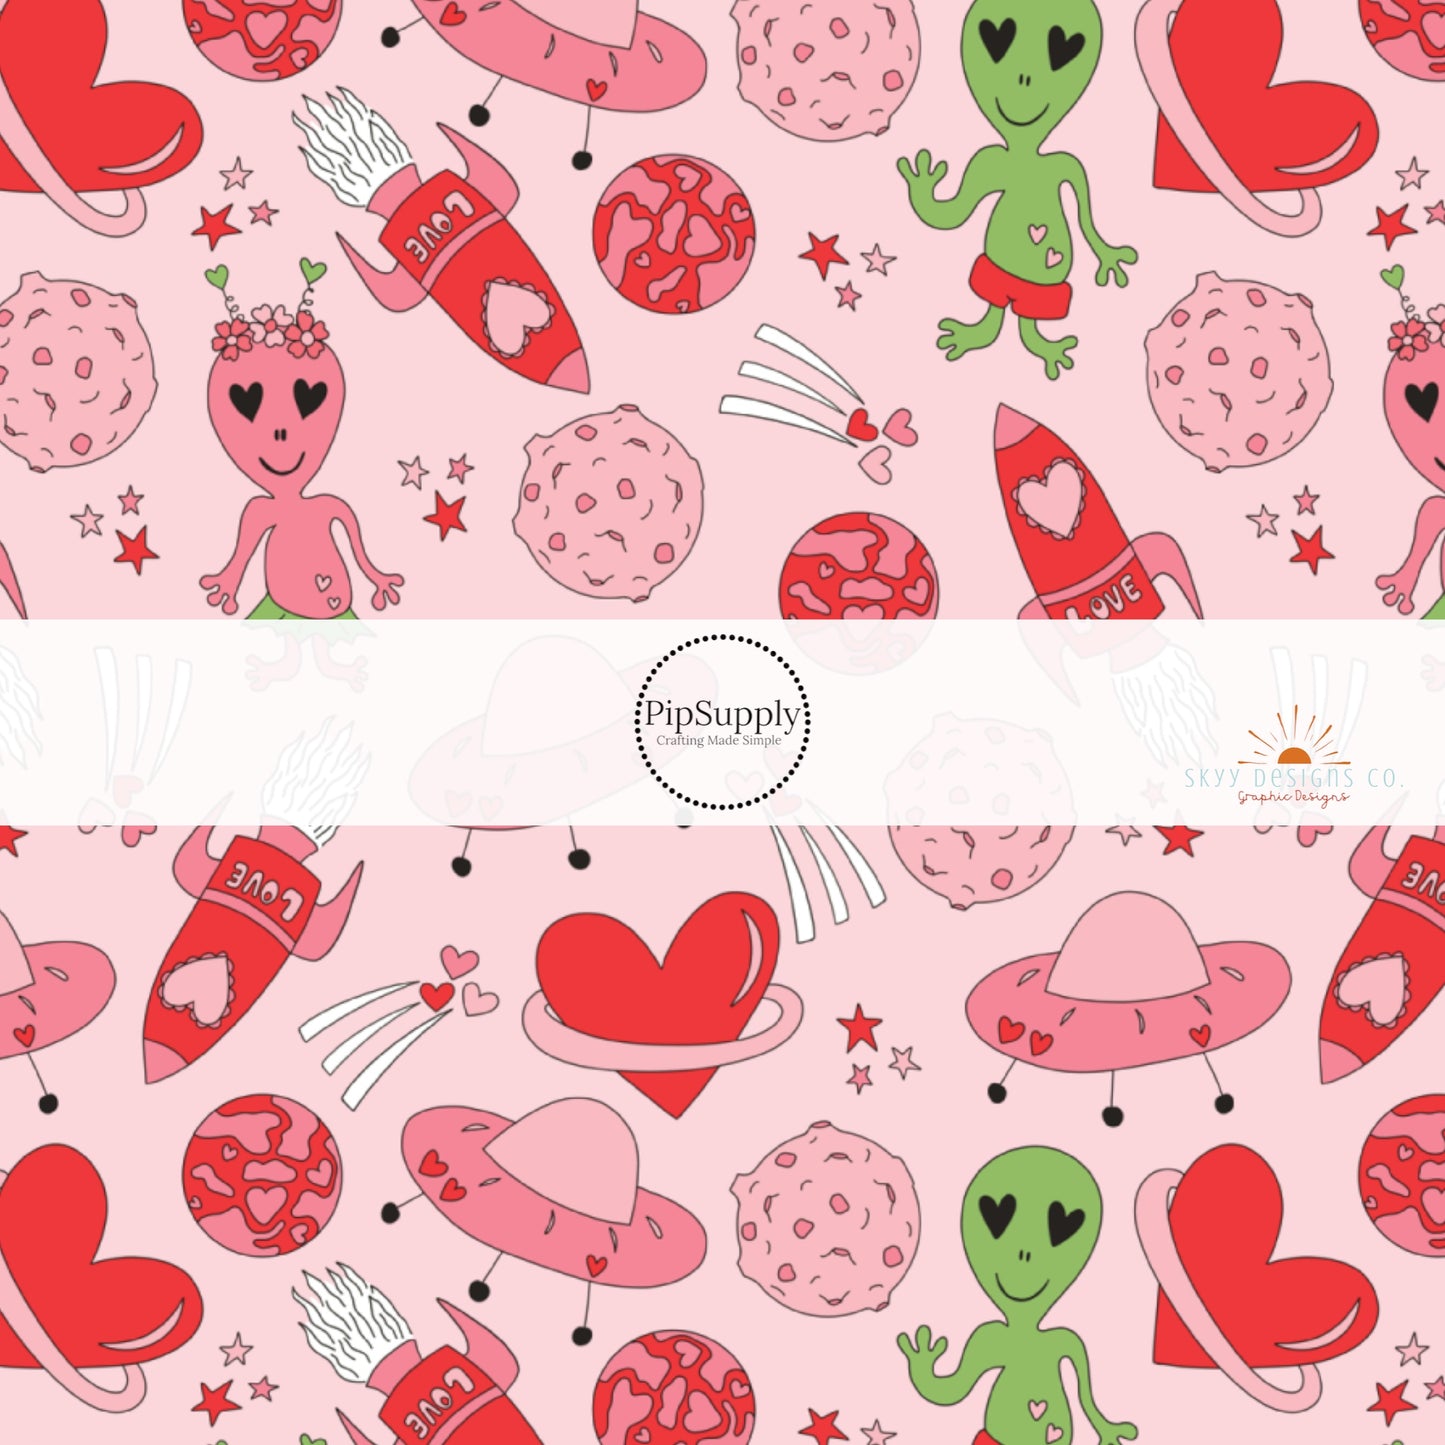 Pink, Red, and Green Outer Space Alien Fabric by the Yard - Heart Shaped Planets - UFO's - Rockets - Valentine's Day Themed Fabric Pattern